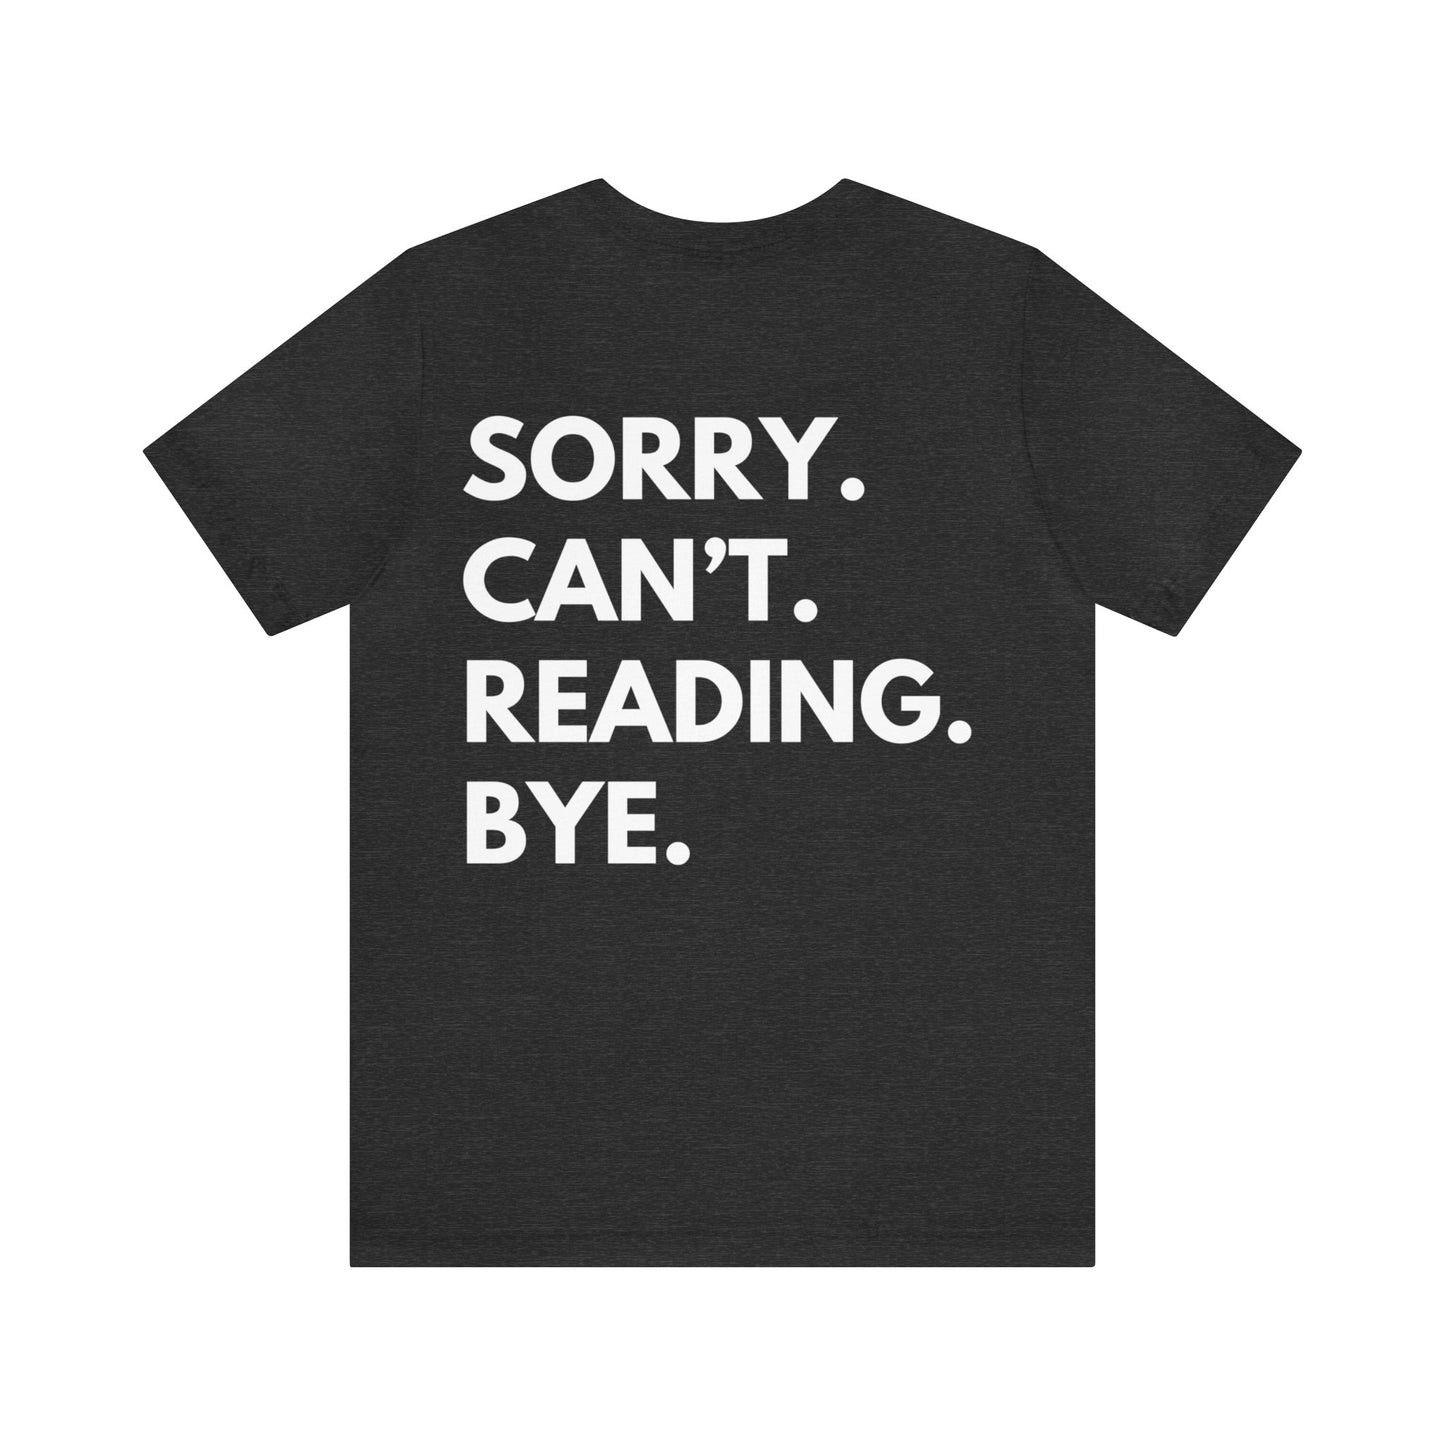 Sorry. Can't. Reading. Bye. T-shirt - Book Lovers